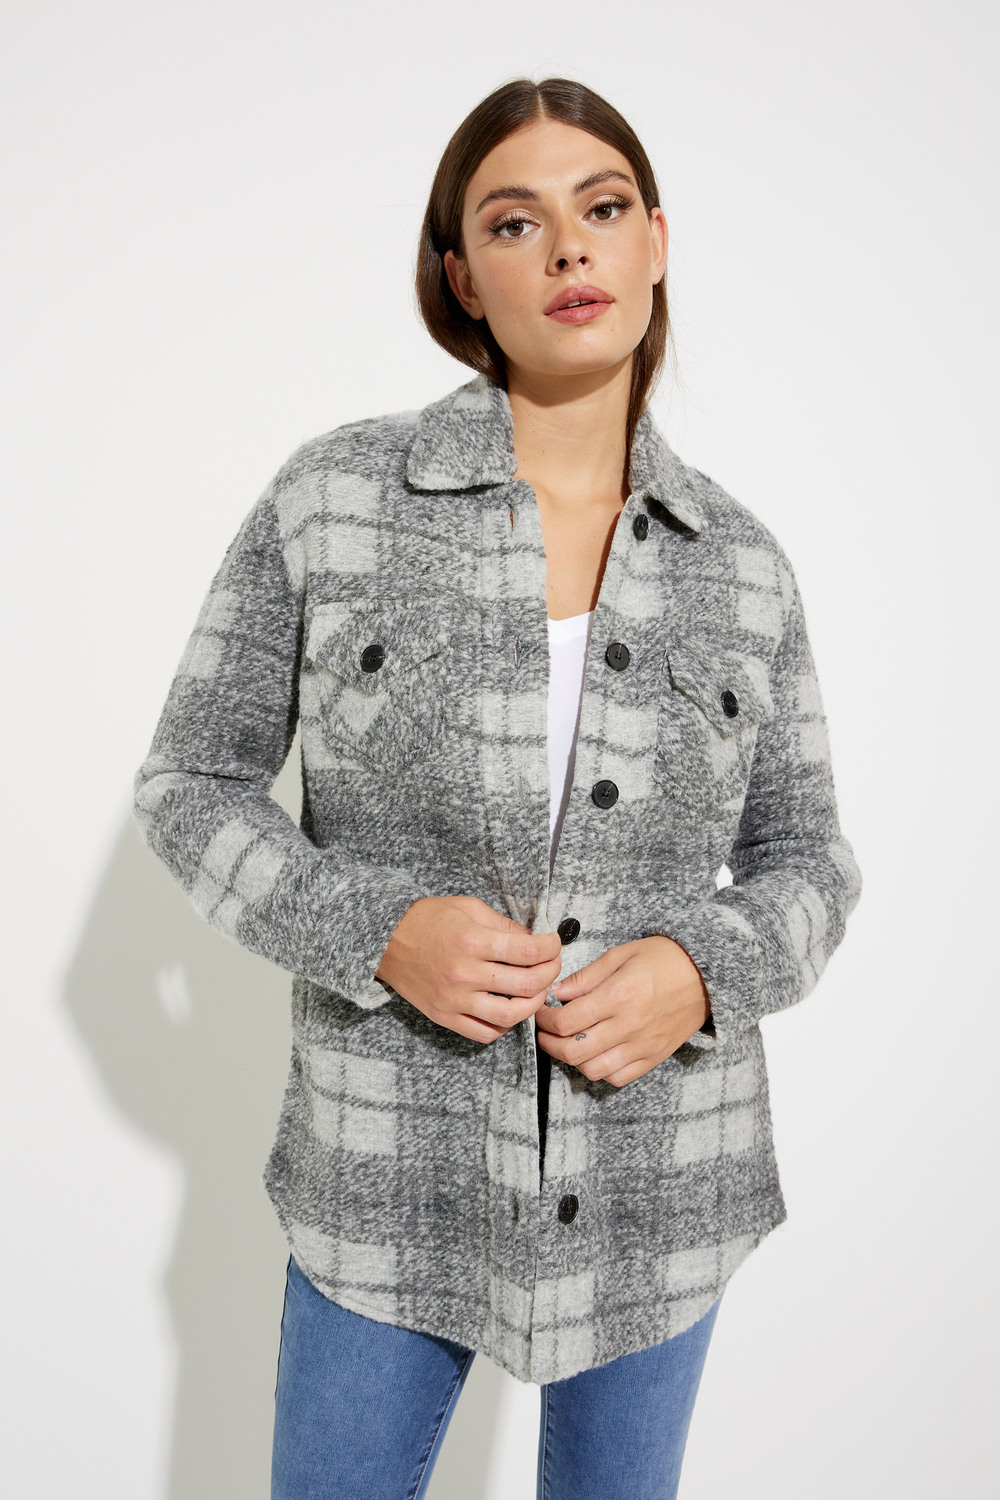 Boiled Wool Shirt Jacket Style C6192R. Charcoal